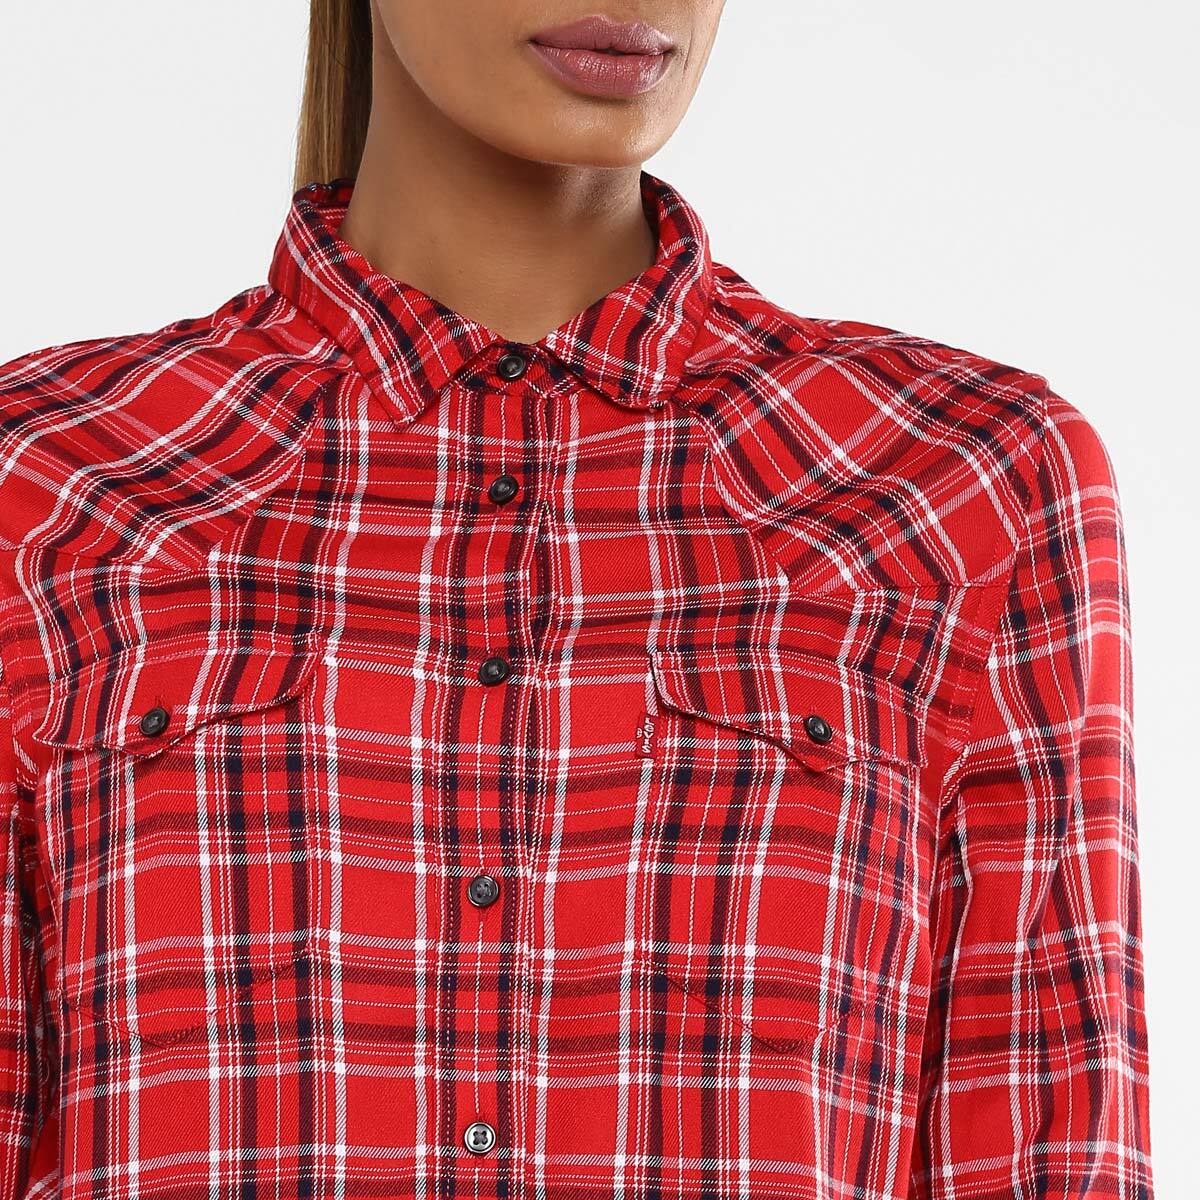 Levi's Western Shirt - Red